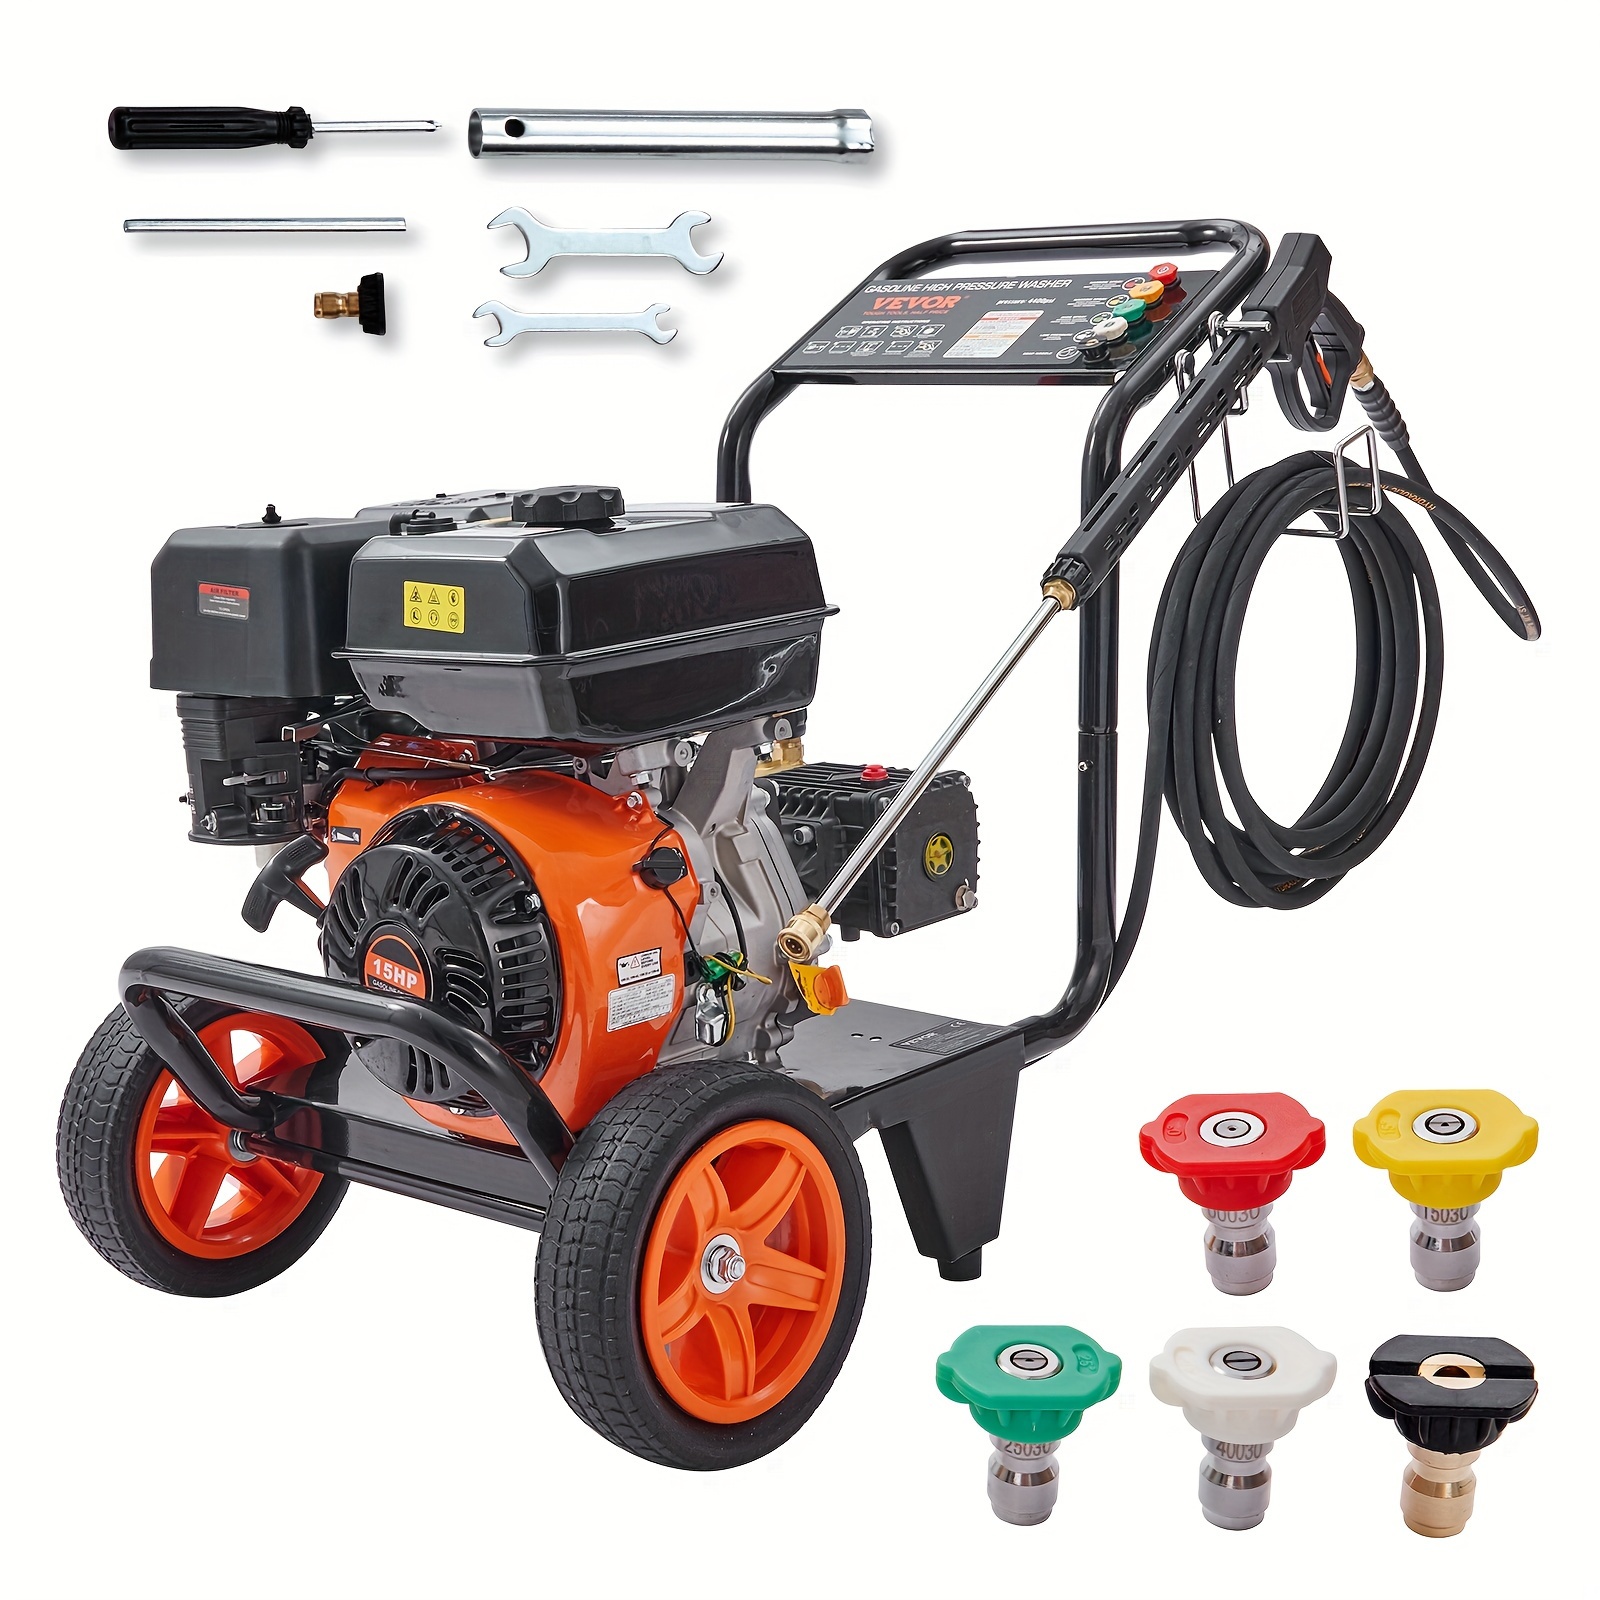 

Vevor Gas Pressure Washer, 4400 Psi 4.0 Gpm, Gas Powered Pressure Washer With Copper Pump, Spray Gun And Extension Wand, 5 Quick Connect Nozzles, For Cleaning Cars, Homes, Driveways, Patios